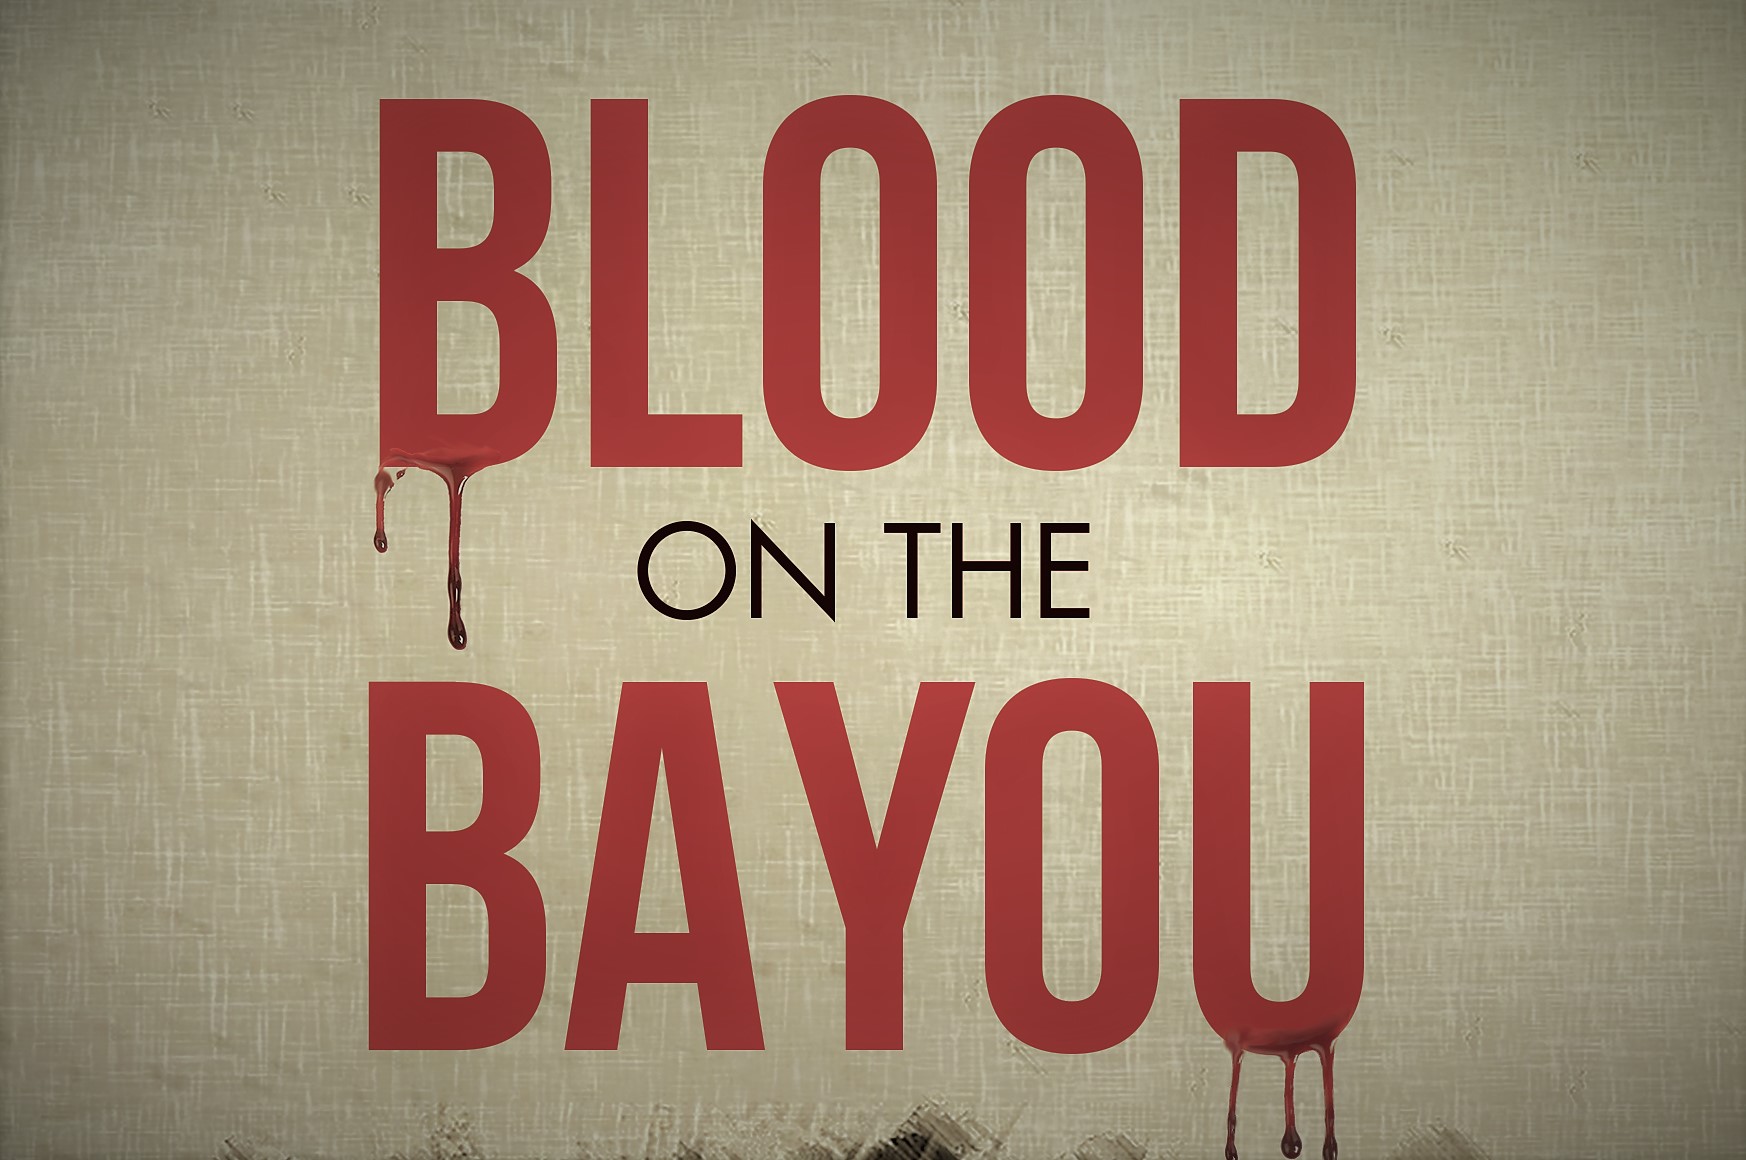 A close up of a book cover for the title "Blood on the Bayou". The background is beige and has a paper texture. The text for 'Blood' and 'Bayou' is red with blood dripping from it.